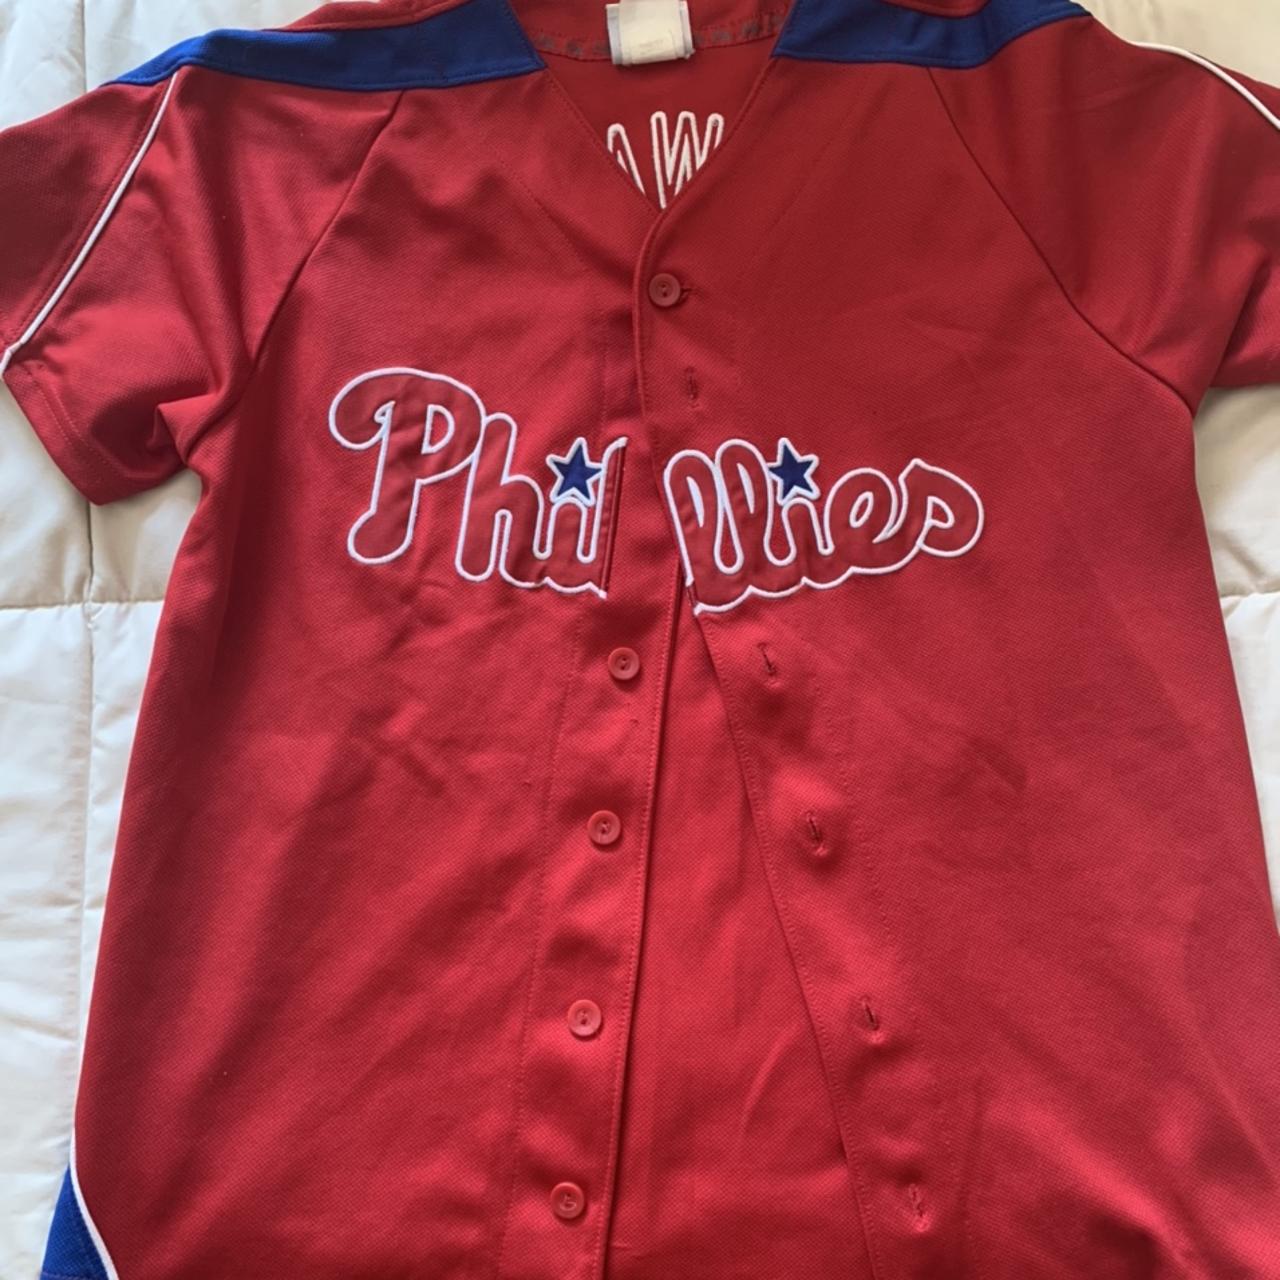 old phillies jersey